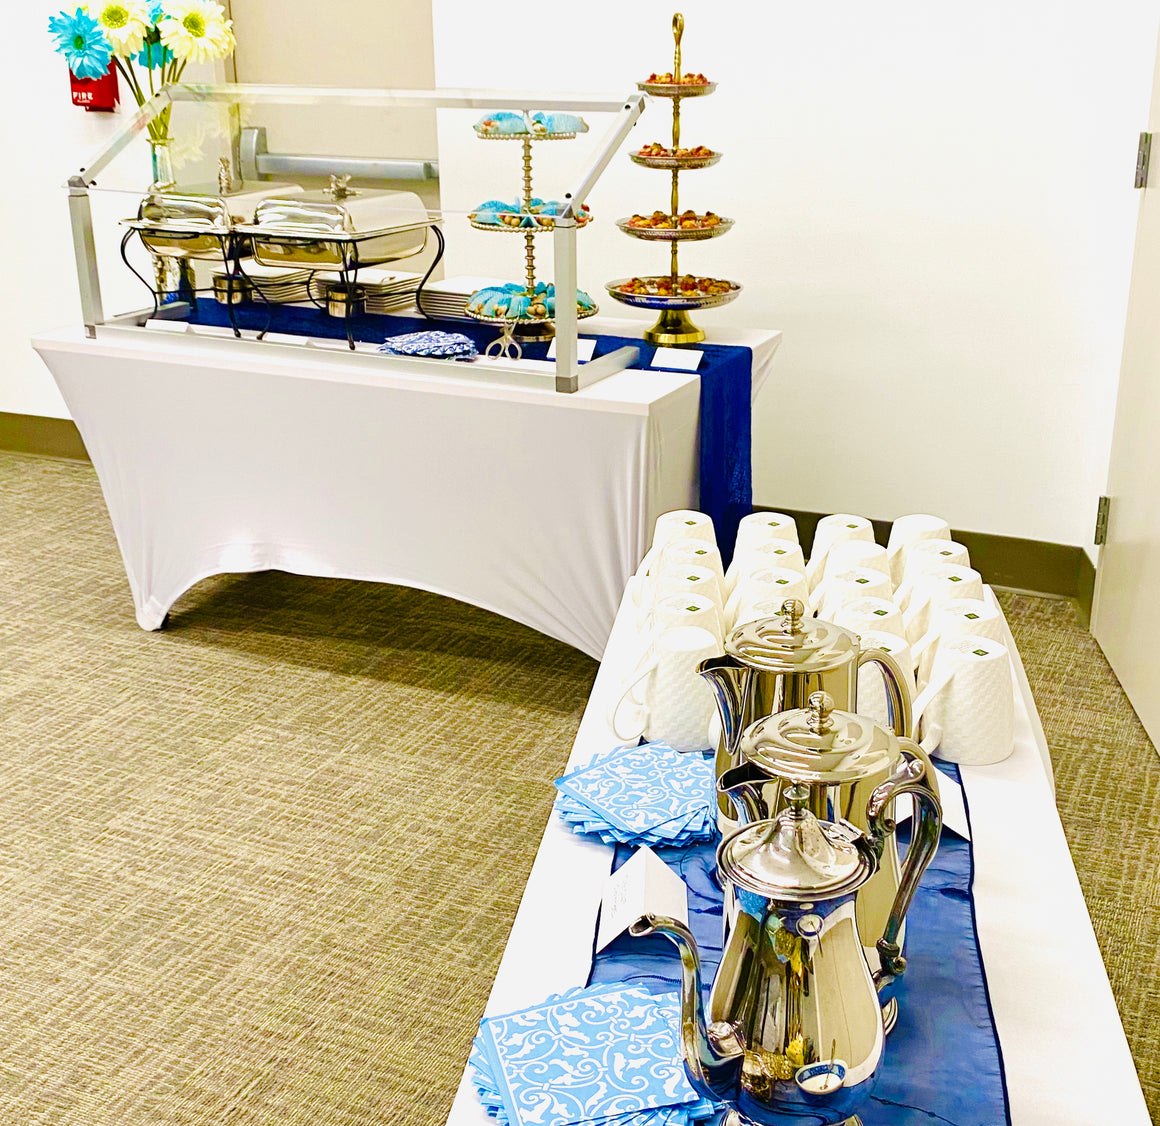 2020 CATERING BEAUTIFULLY & SAFELY DURING COVID-19 - FULL SERVICE GRADUATION PARTY